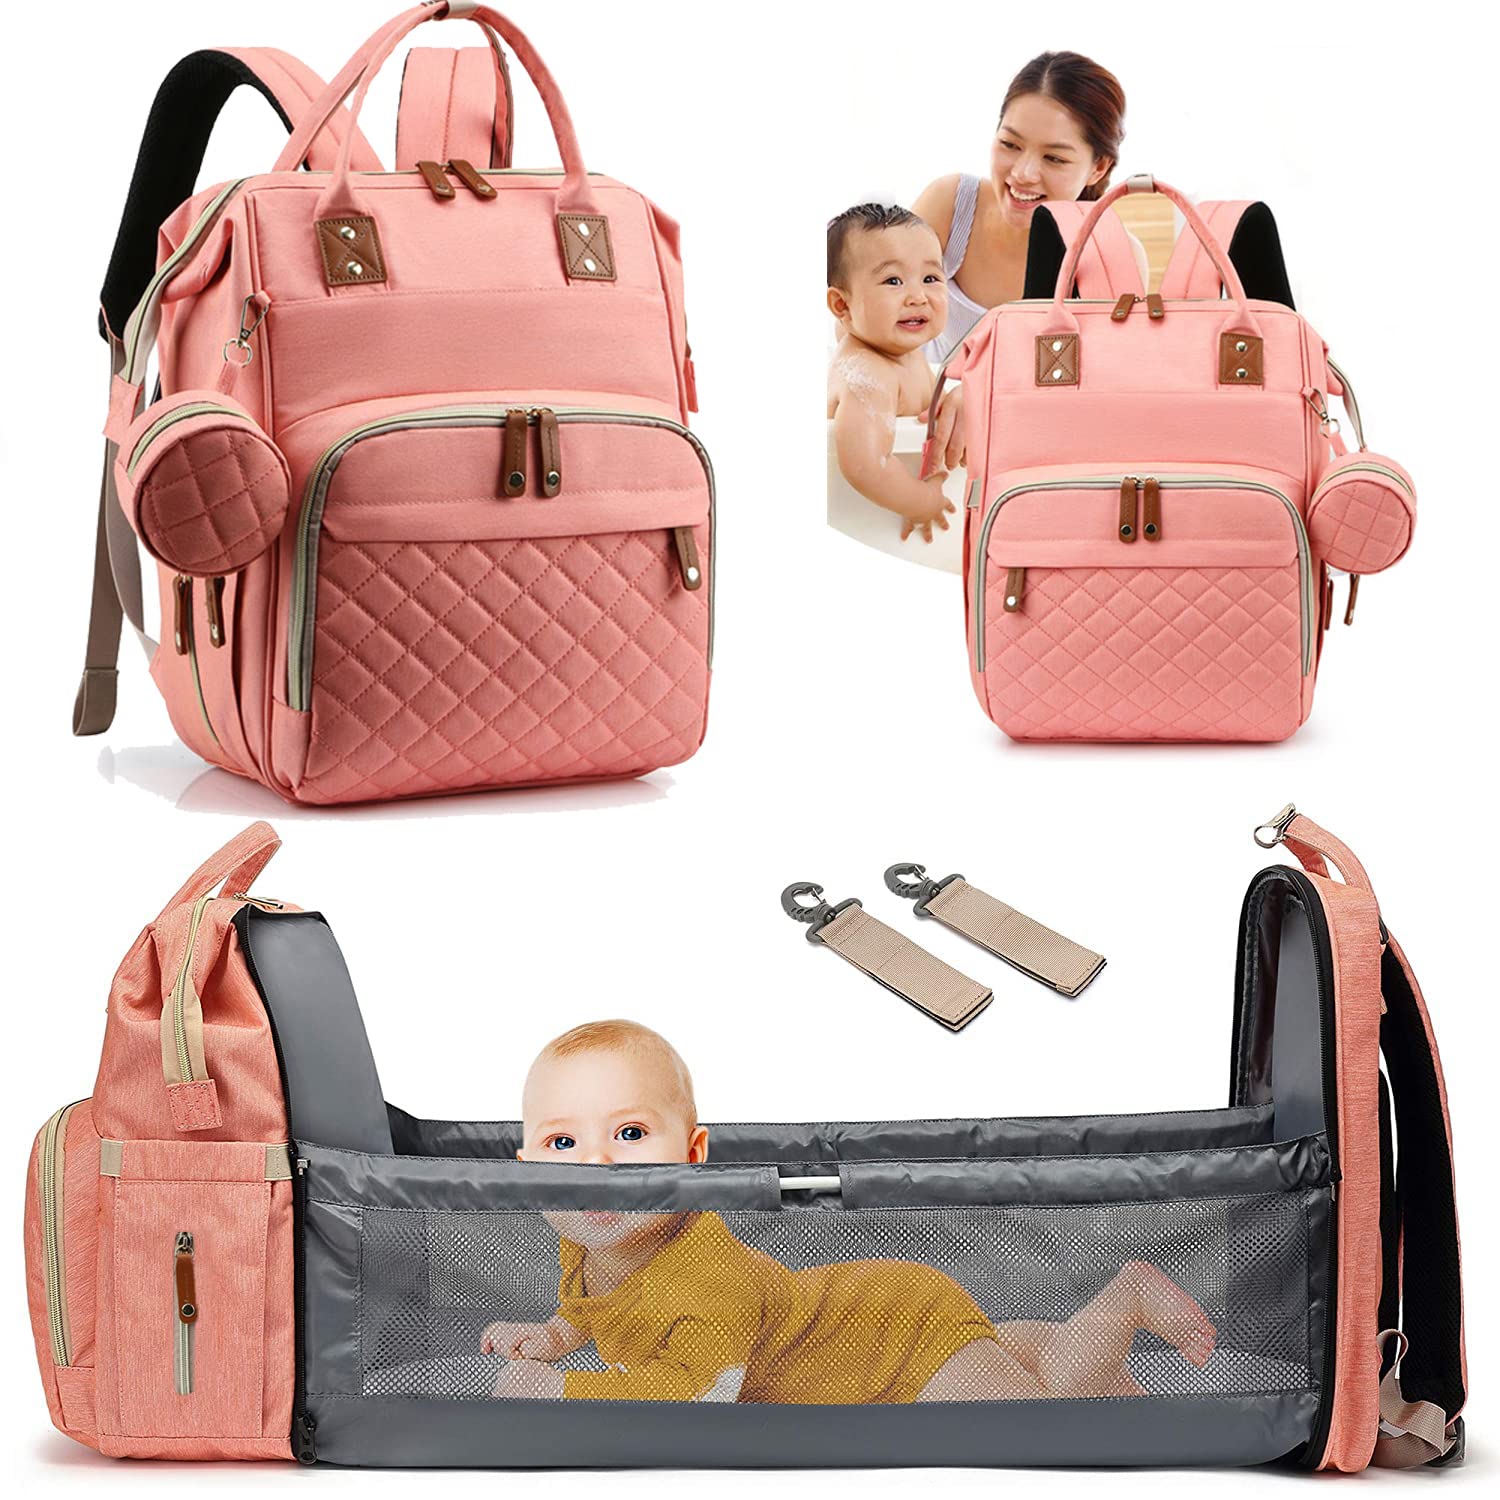 Diaper Bag Backpack, Portable Travel Mommy Bag with Changing